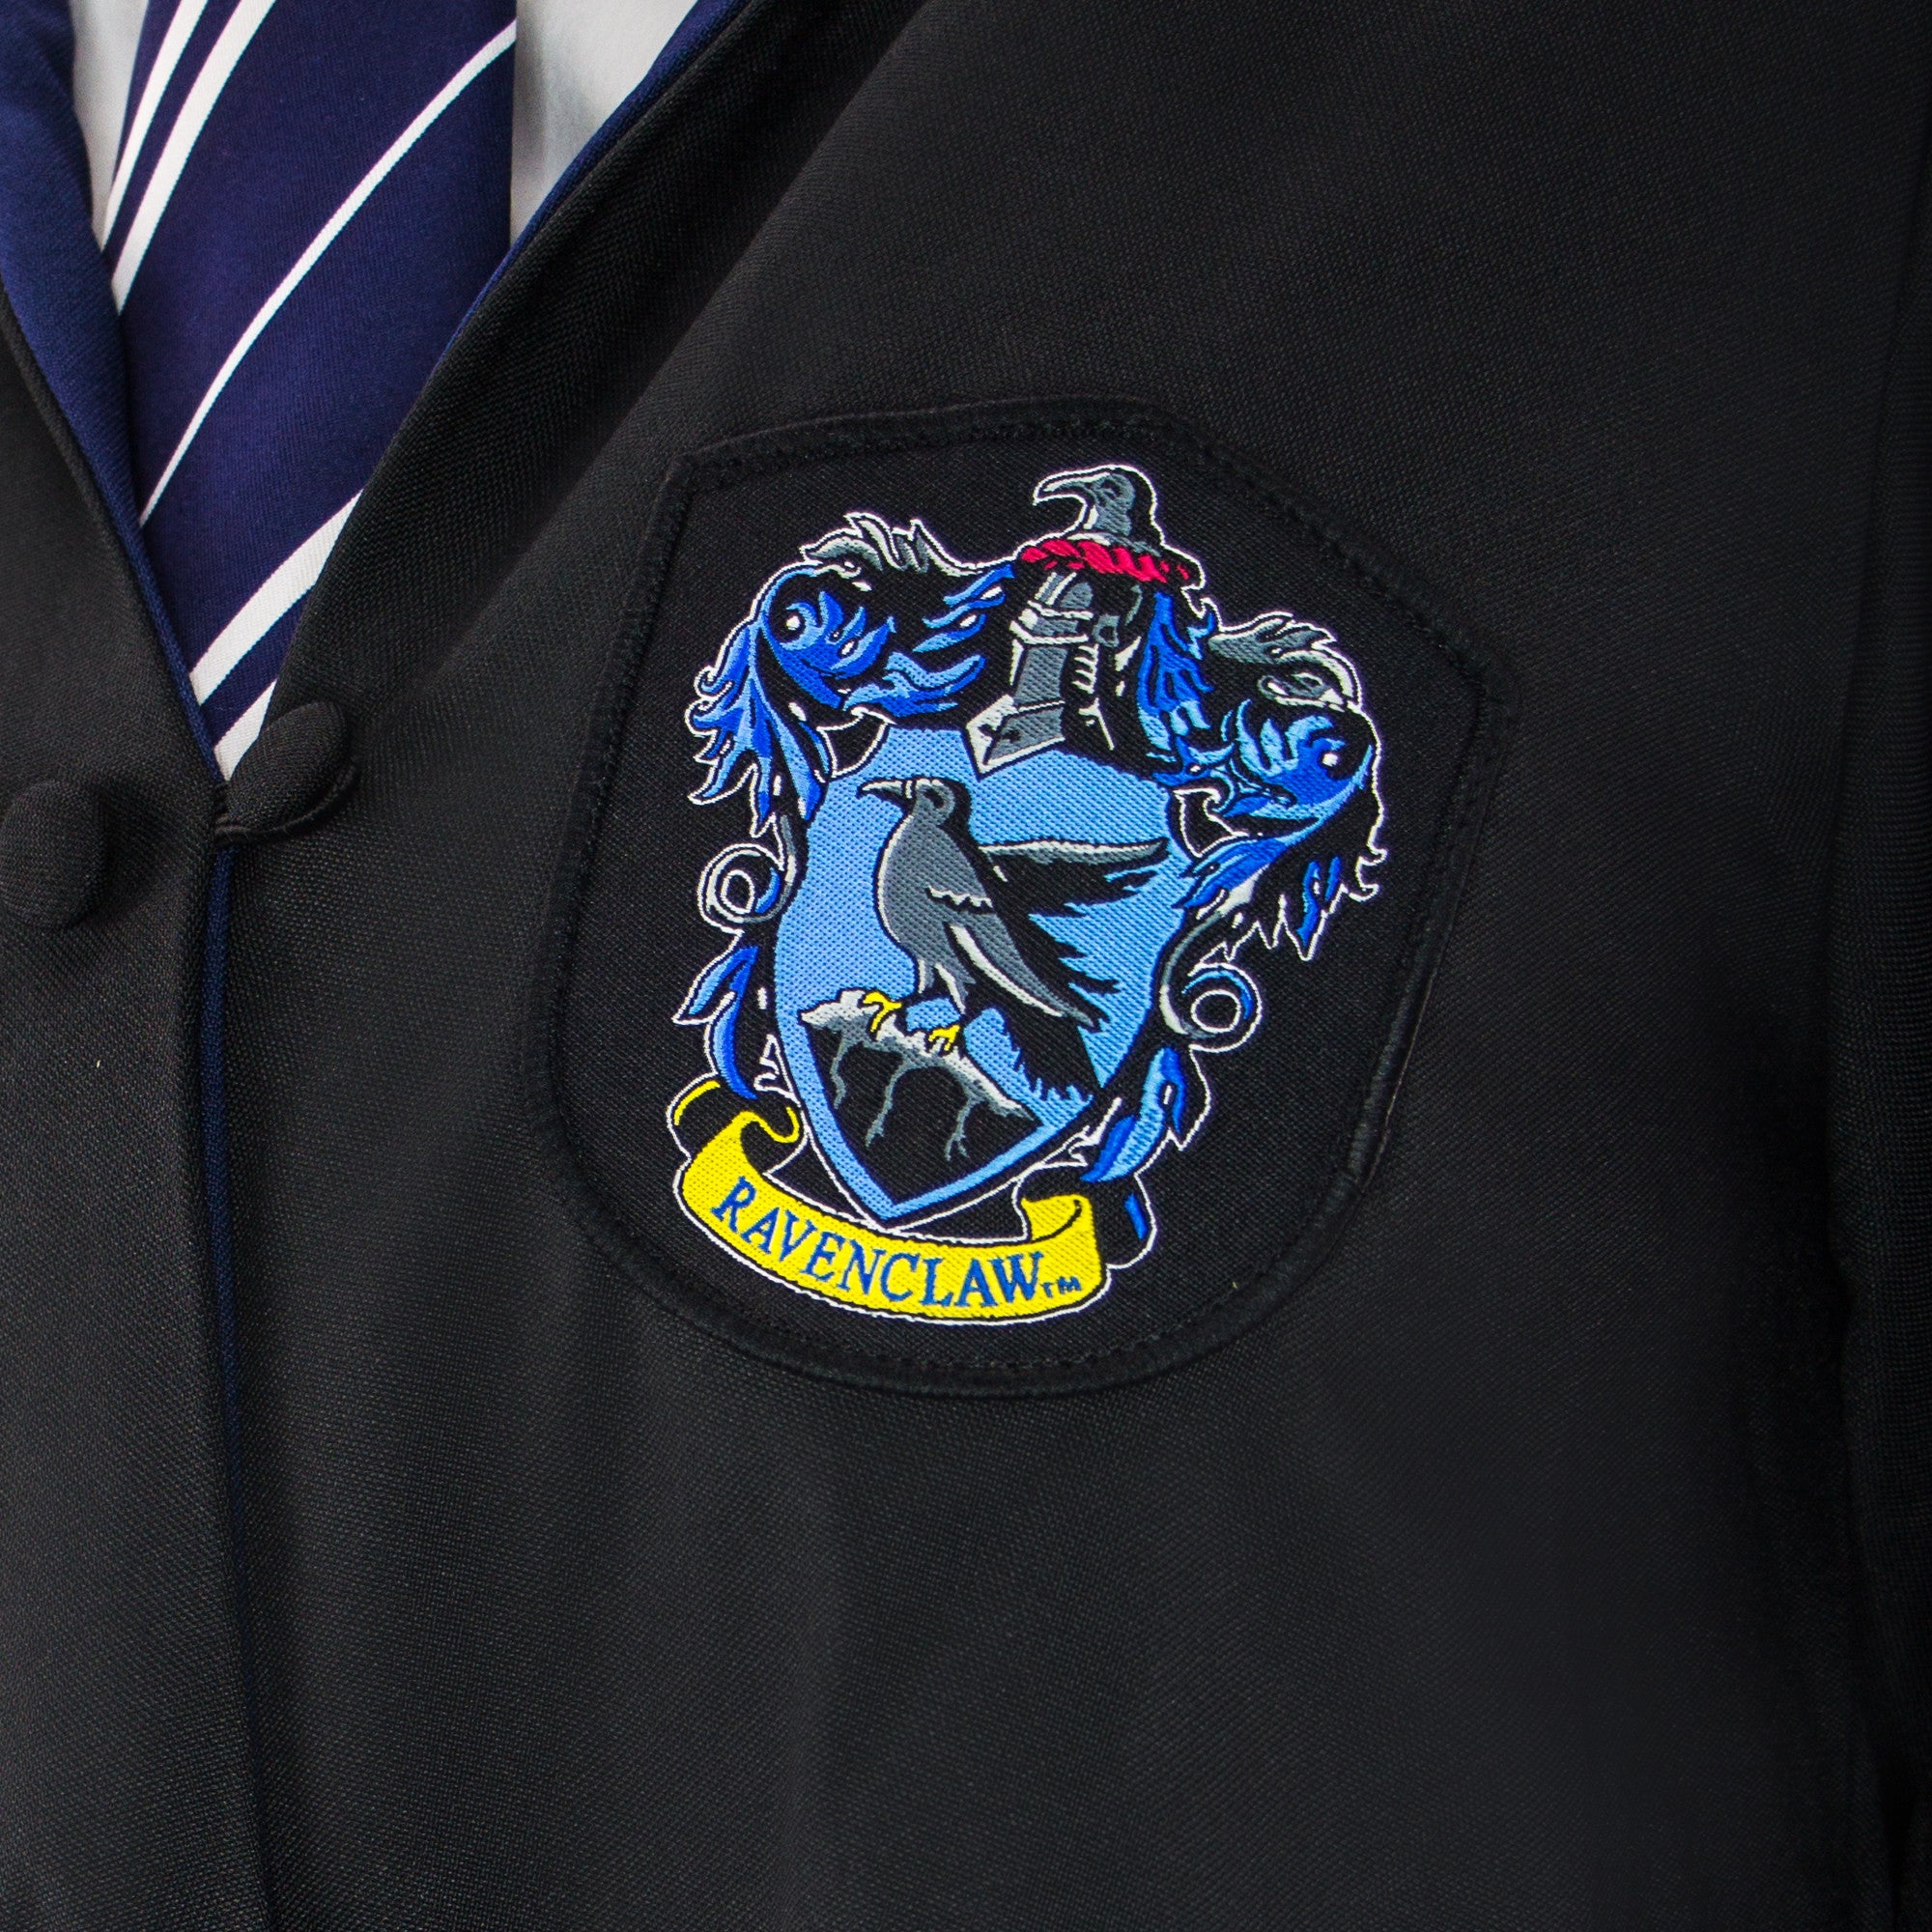 Adult Ravenclaw Robe - Harry Potter